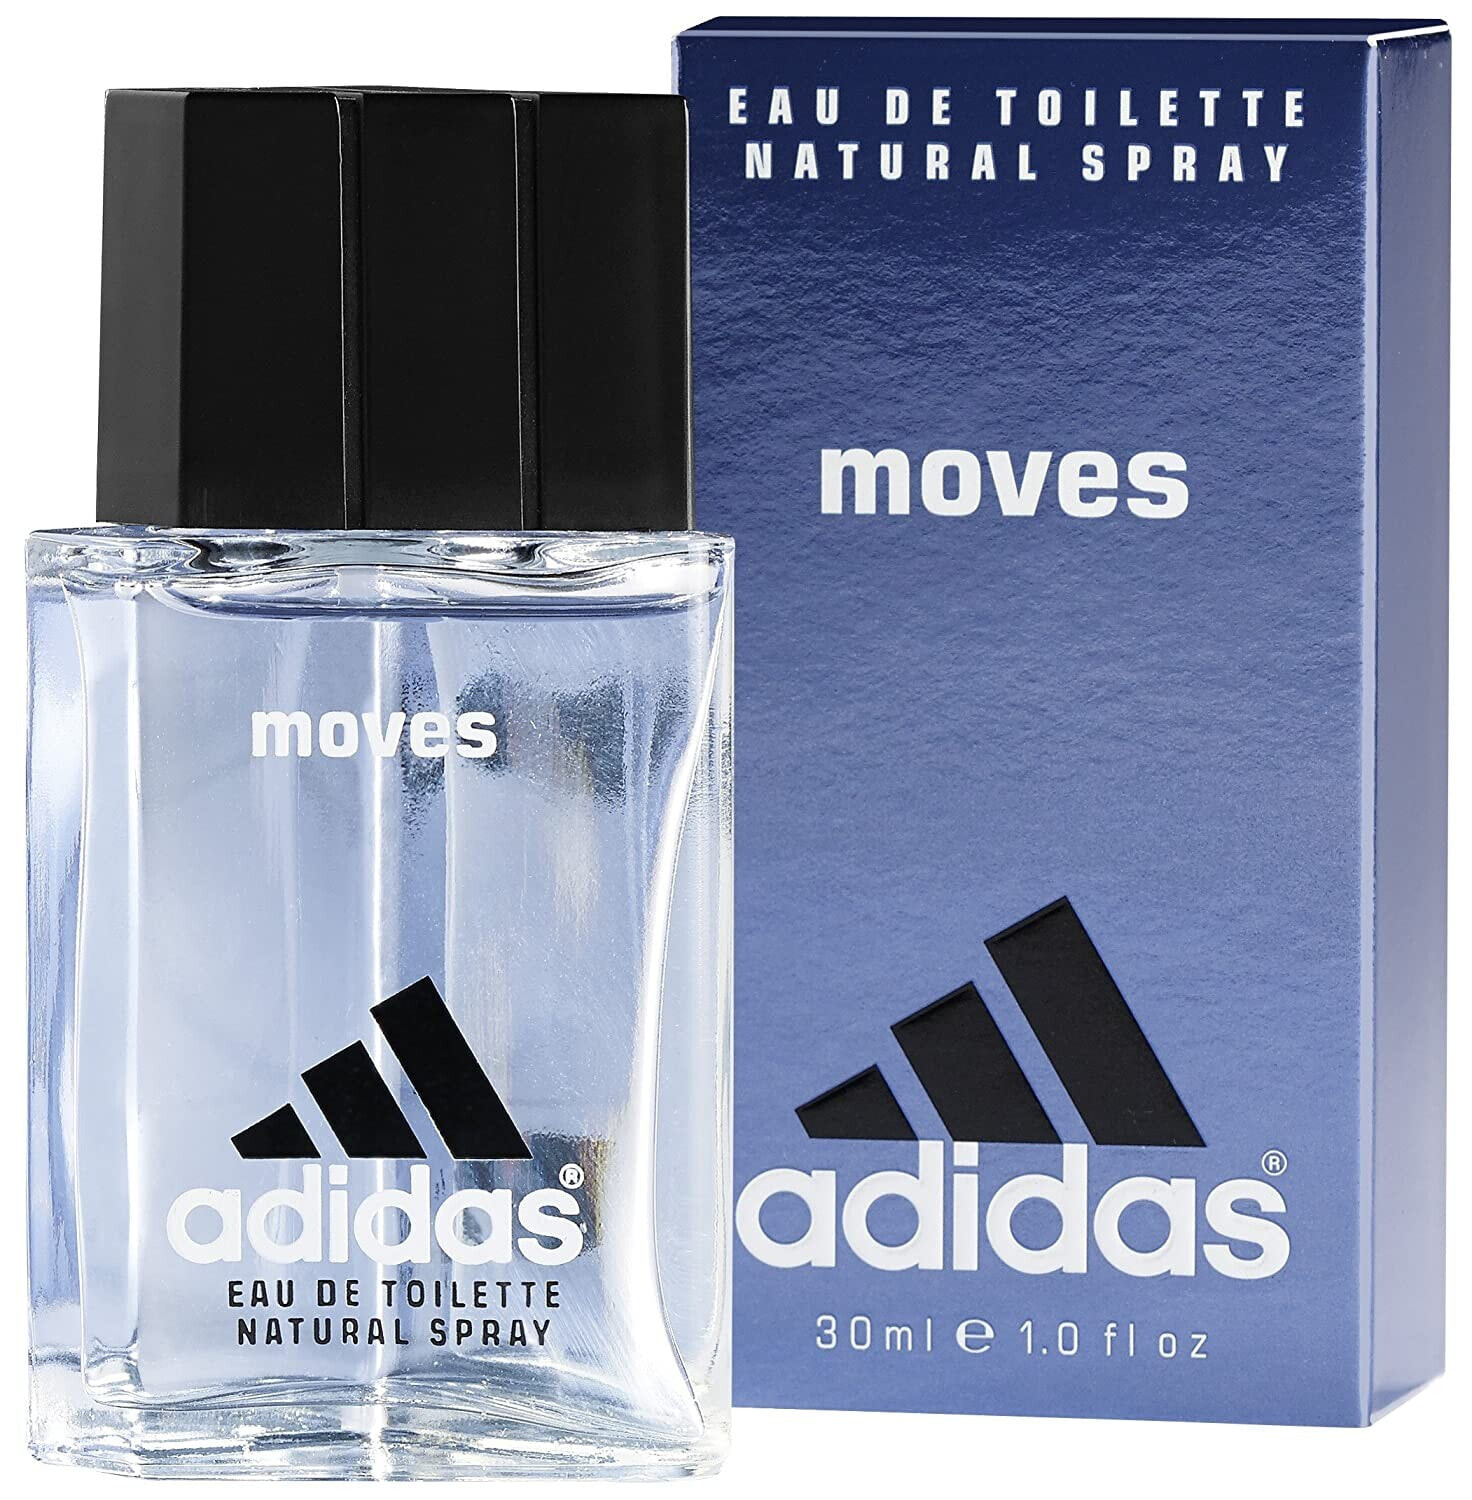 adidas Moves For Him Eau de Toilette - Men's Perfume with Exciting Refreshing Fragrance Gives a Revitalising Effect - 1 x 30 ml